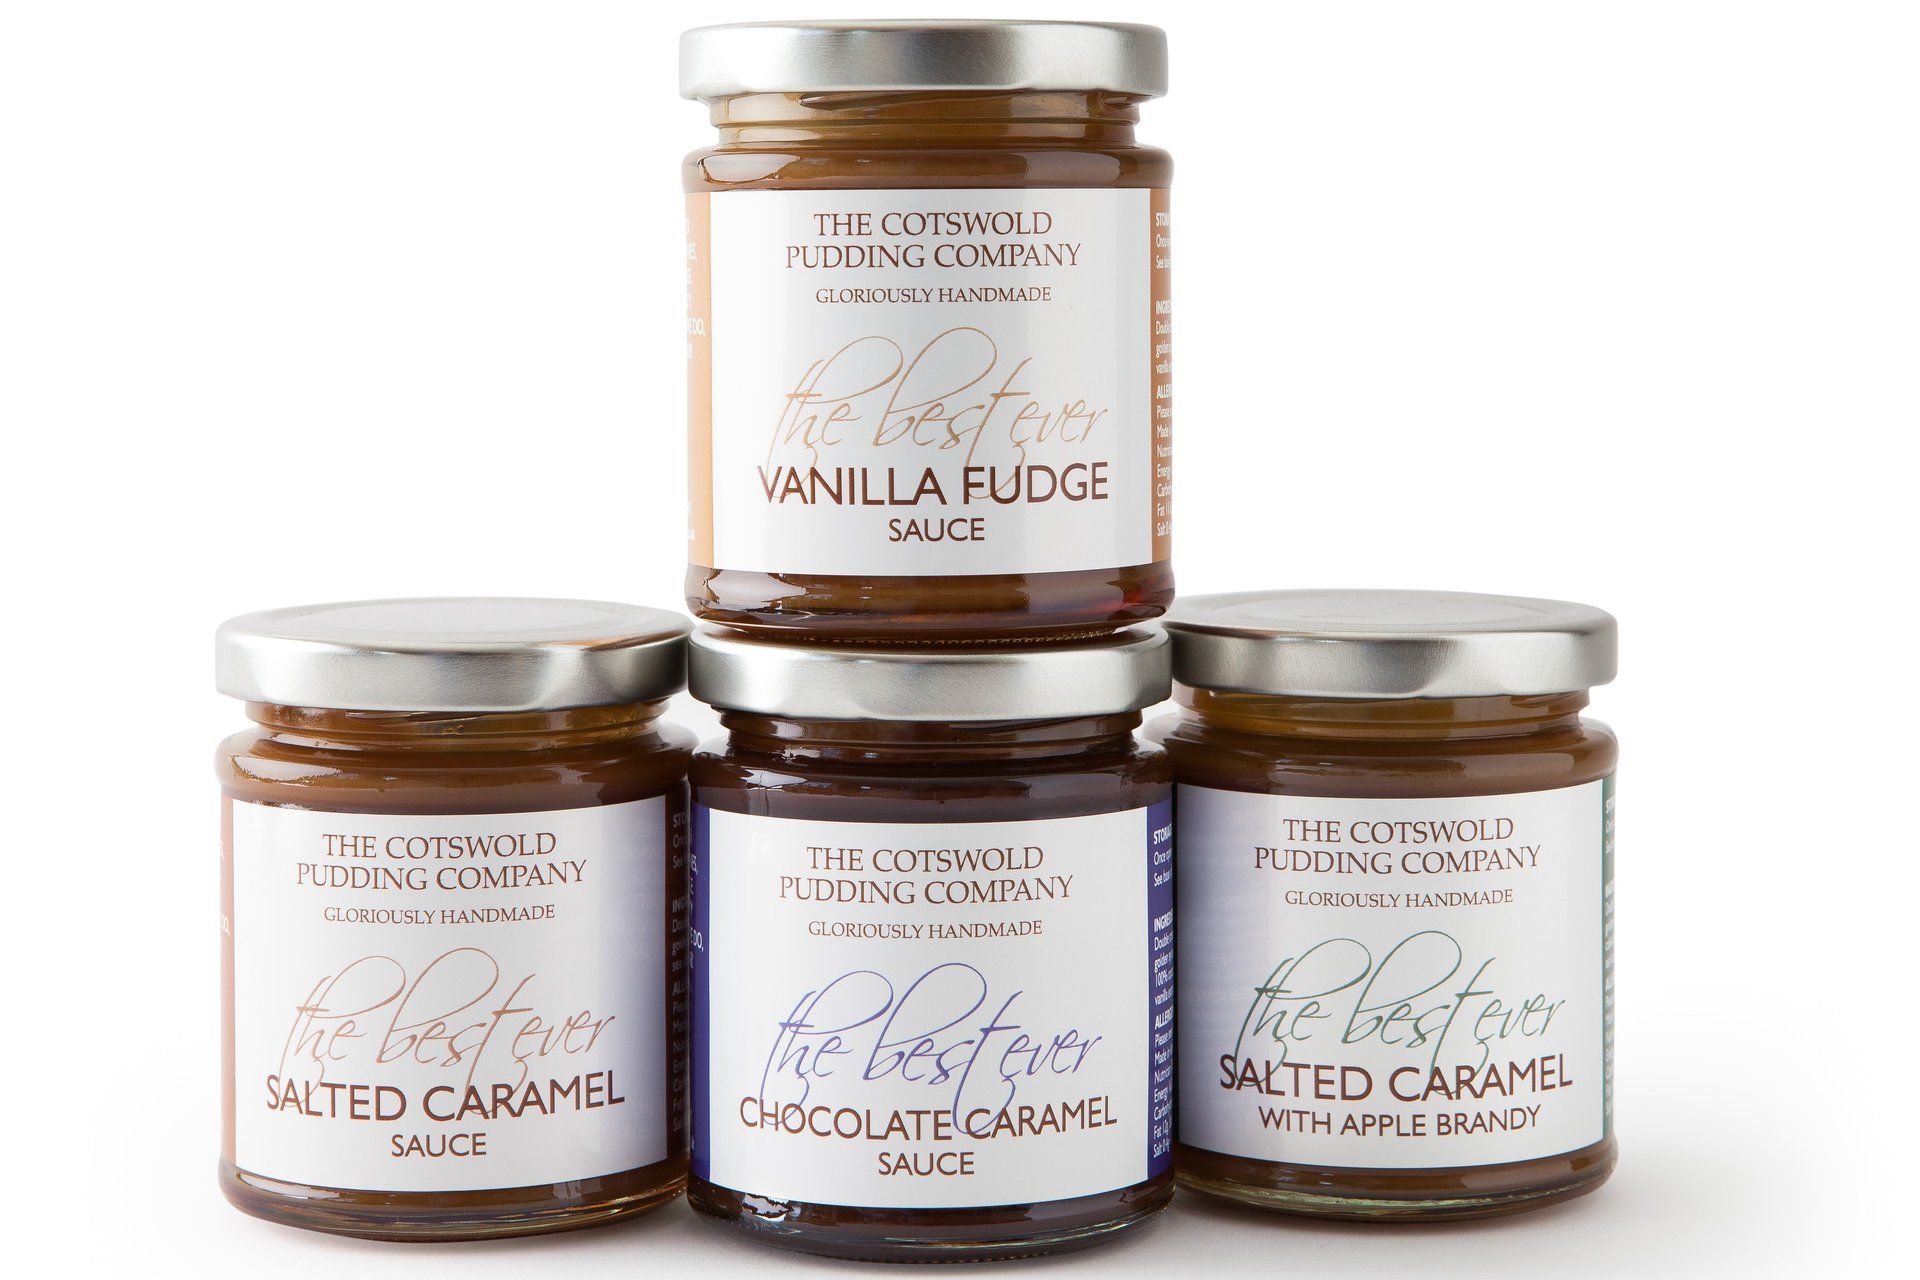 Cotswold Pudding Company Caramel Sauces